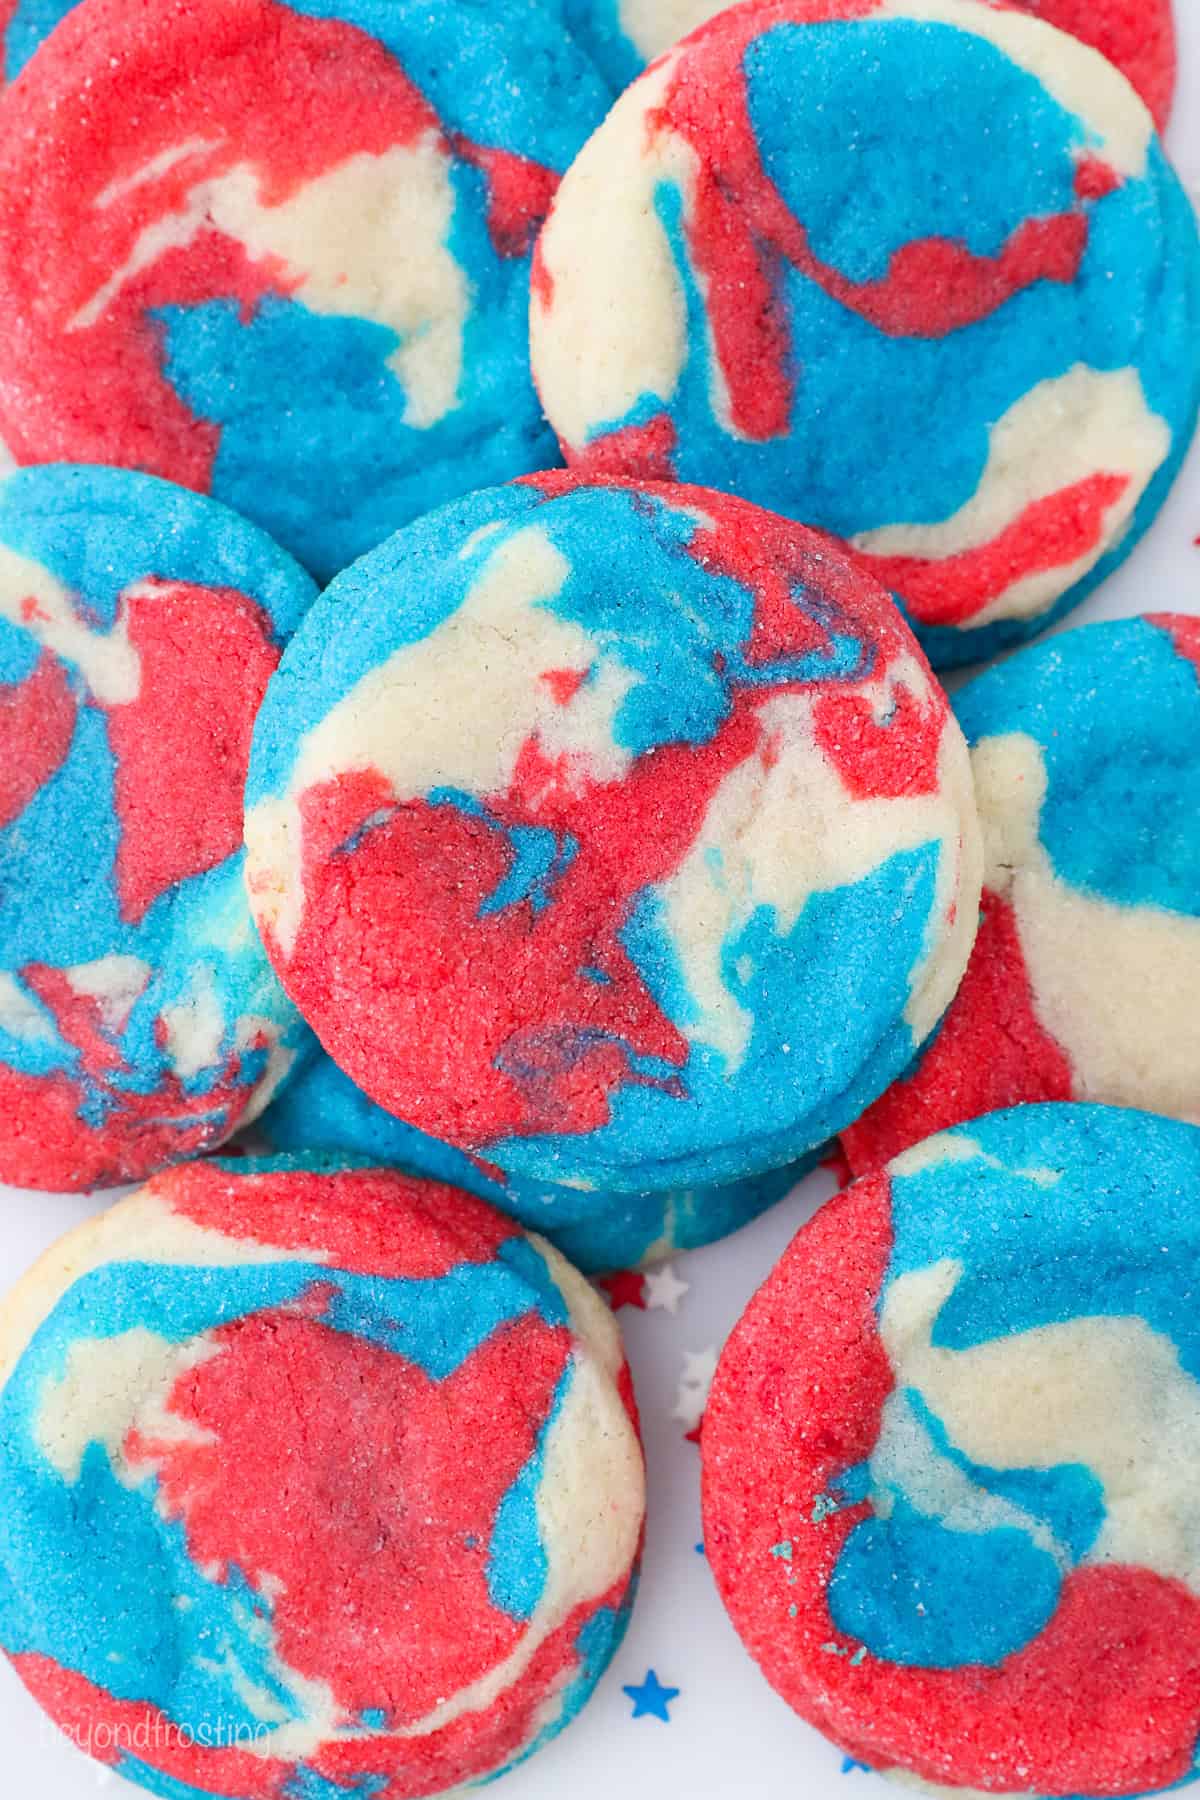 Overhead view of assorted red, white, and blue tye-dye patriotic sugar cookies.